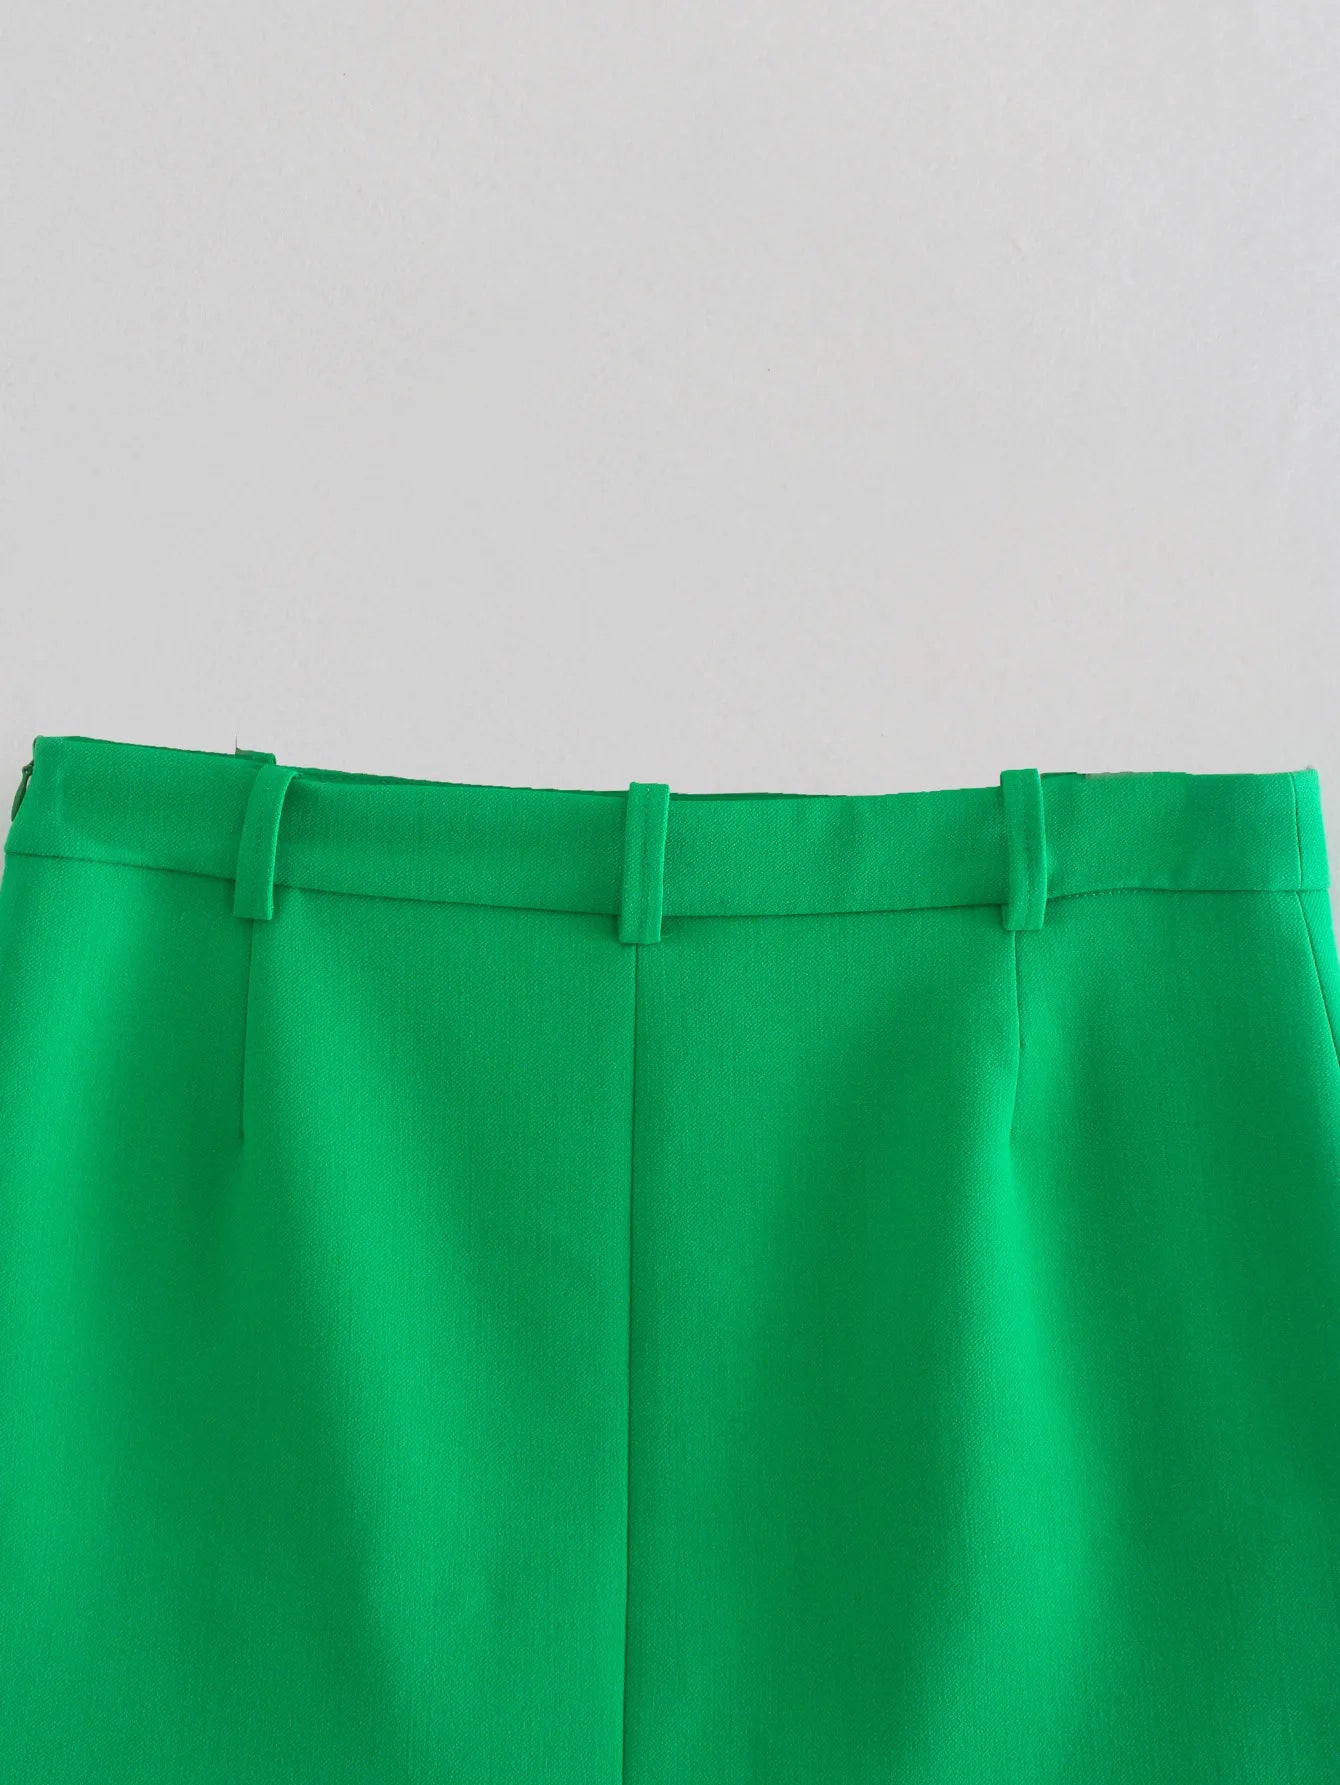 Dreamofthe90s Green Skirt part of matching suit set image 23